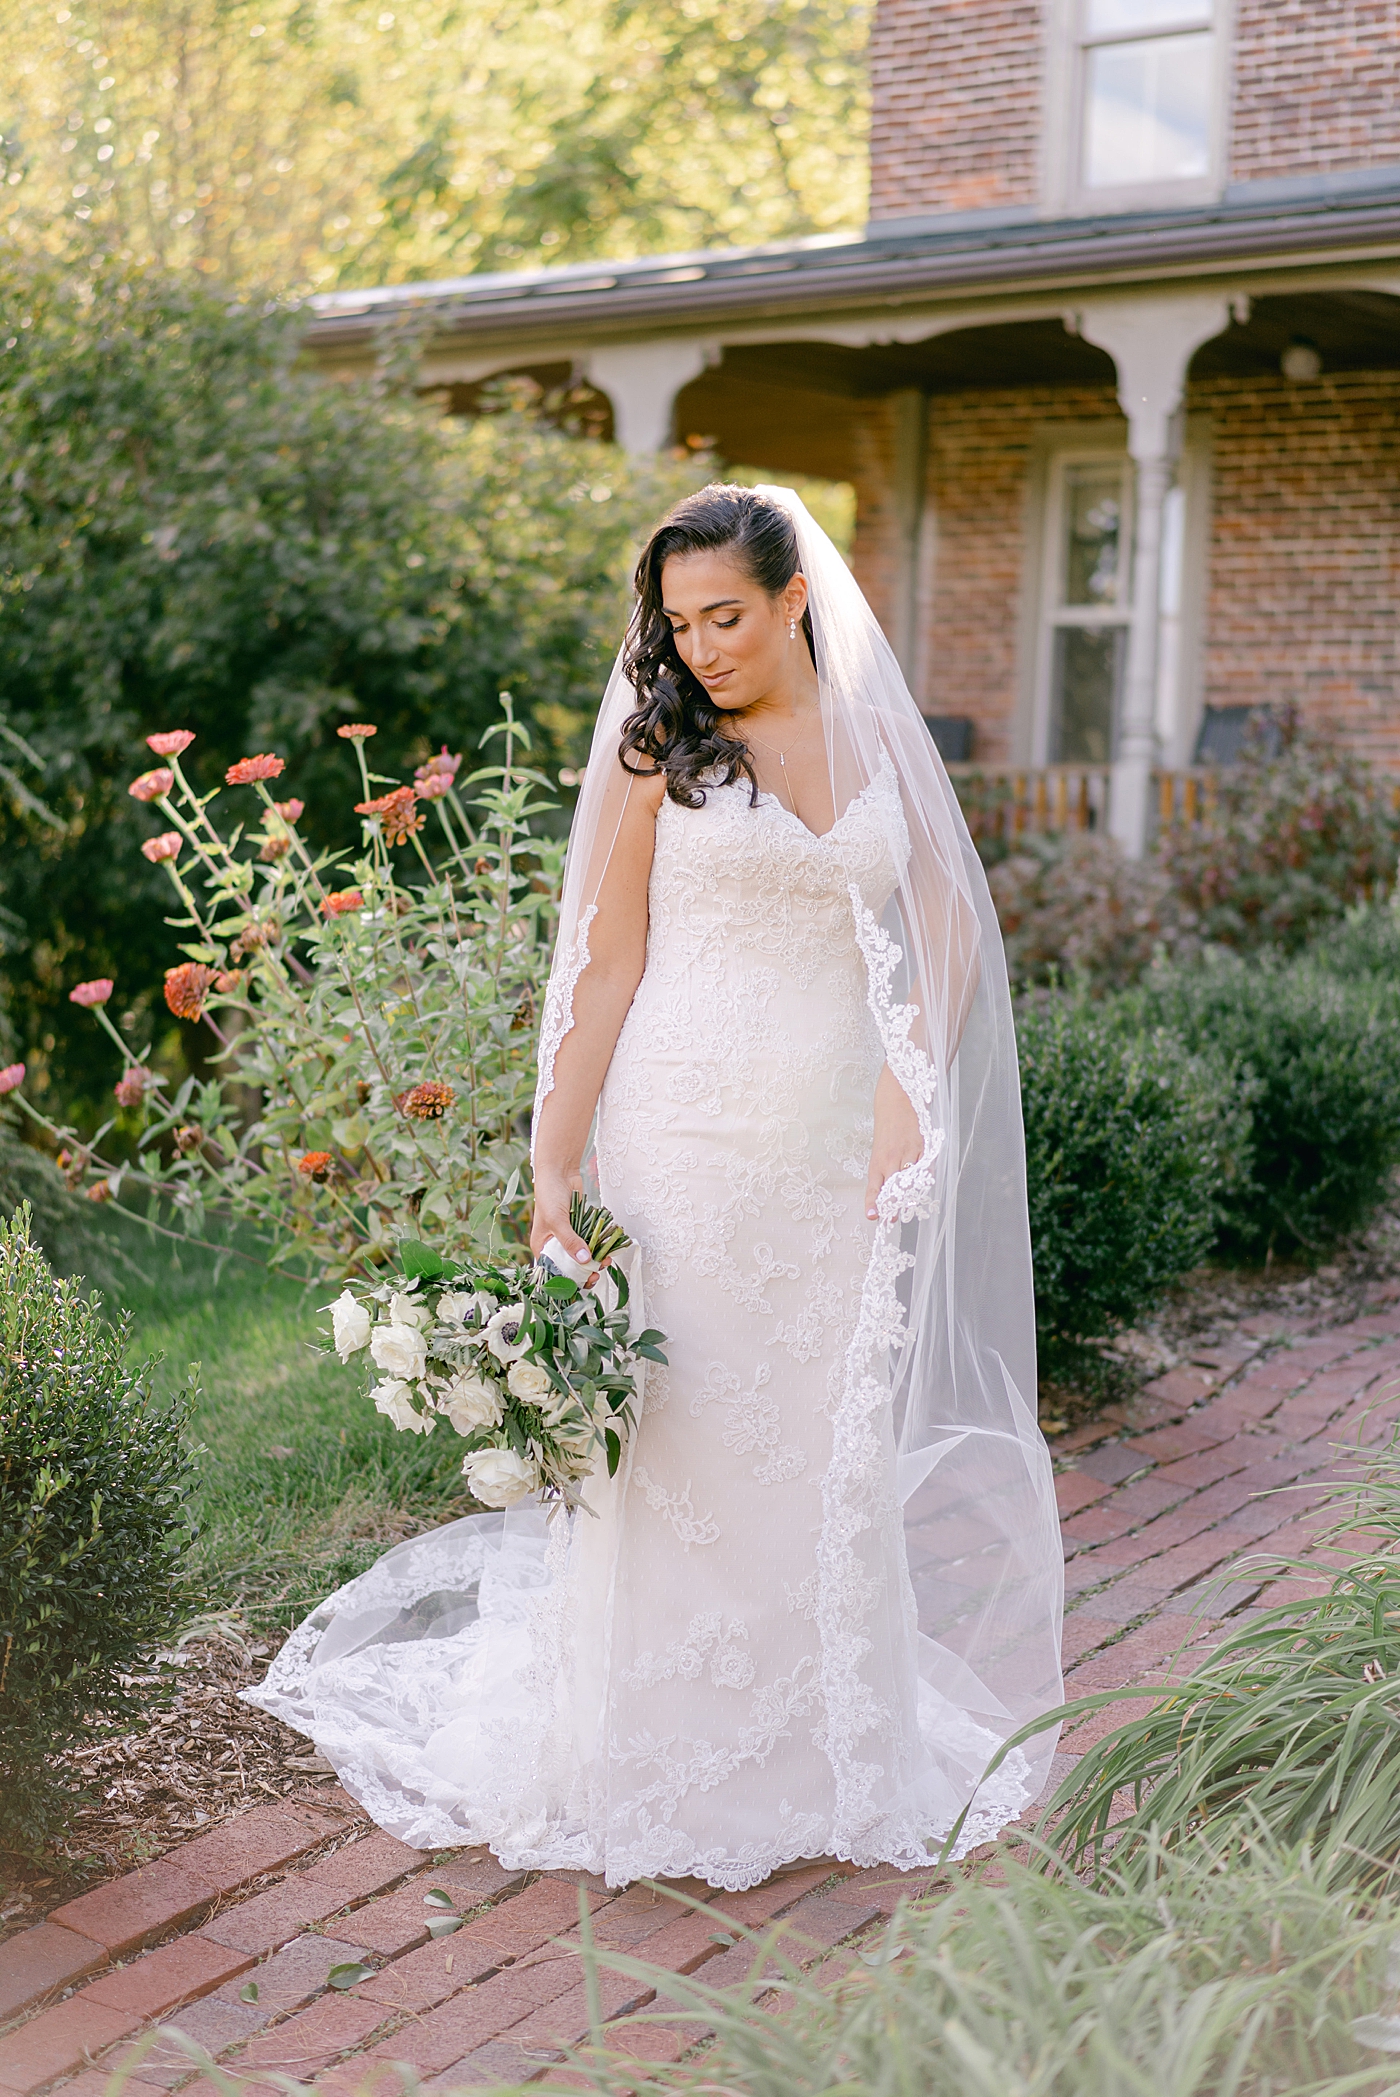 Bride with veil holding her bouquet | Photo by Hope Helmuth Photography